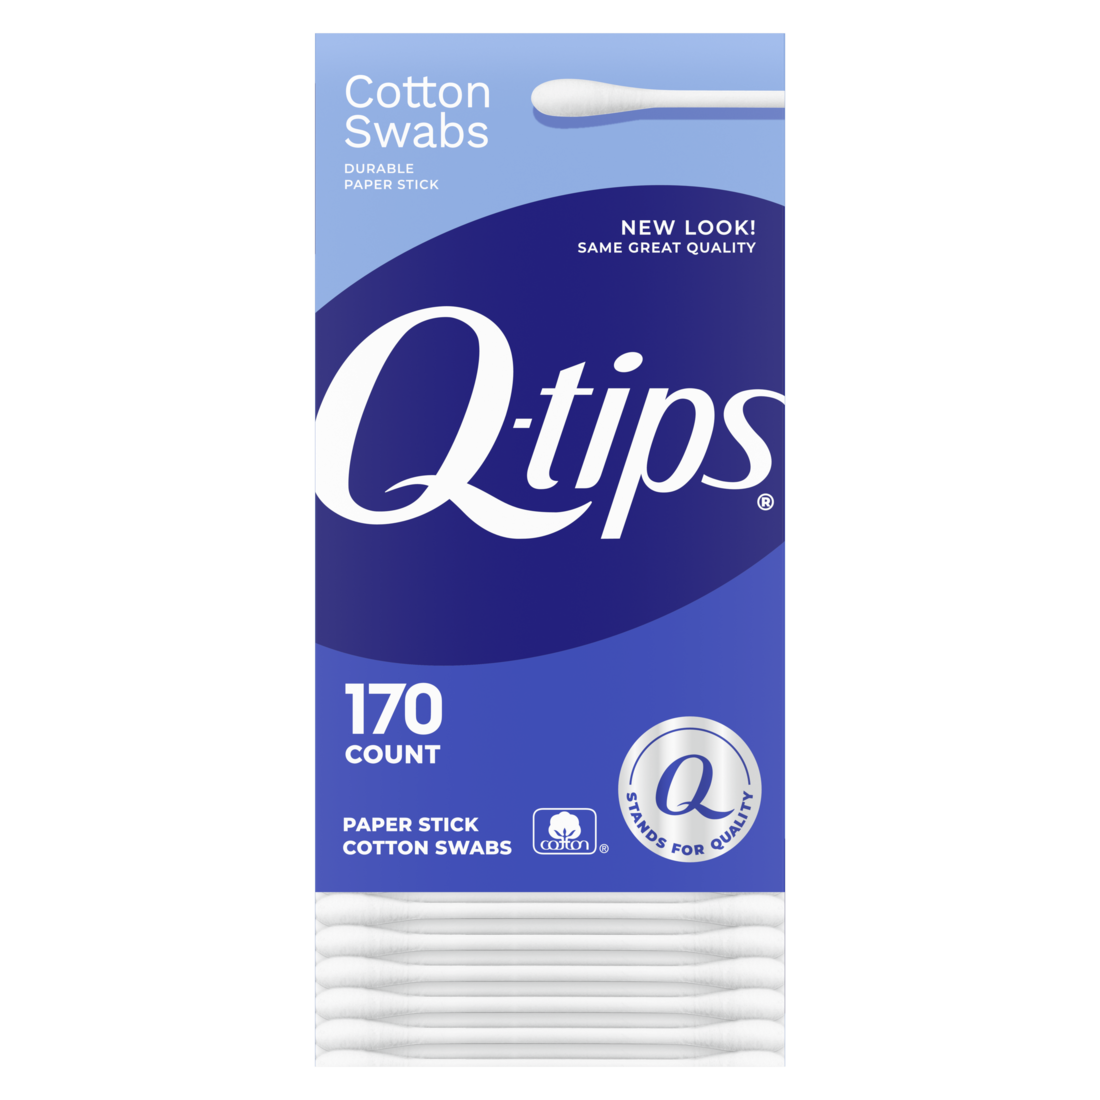 Q-tips Cotton Swabs, Original, For Home, First Aid and Beauty, 100% Cotton, 170 Count - image 1 of 6